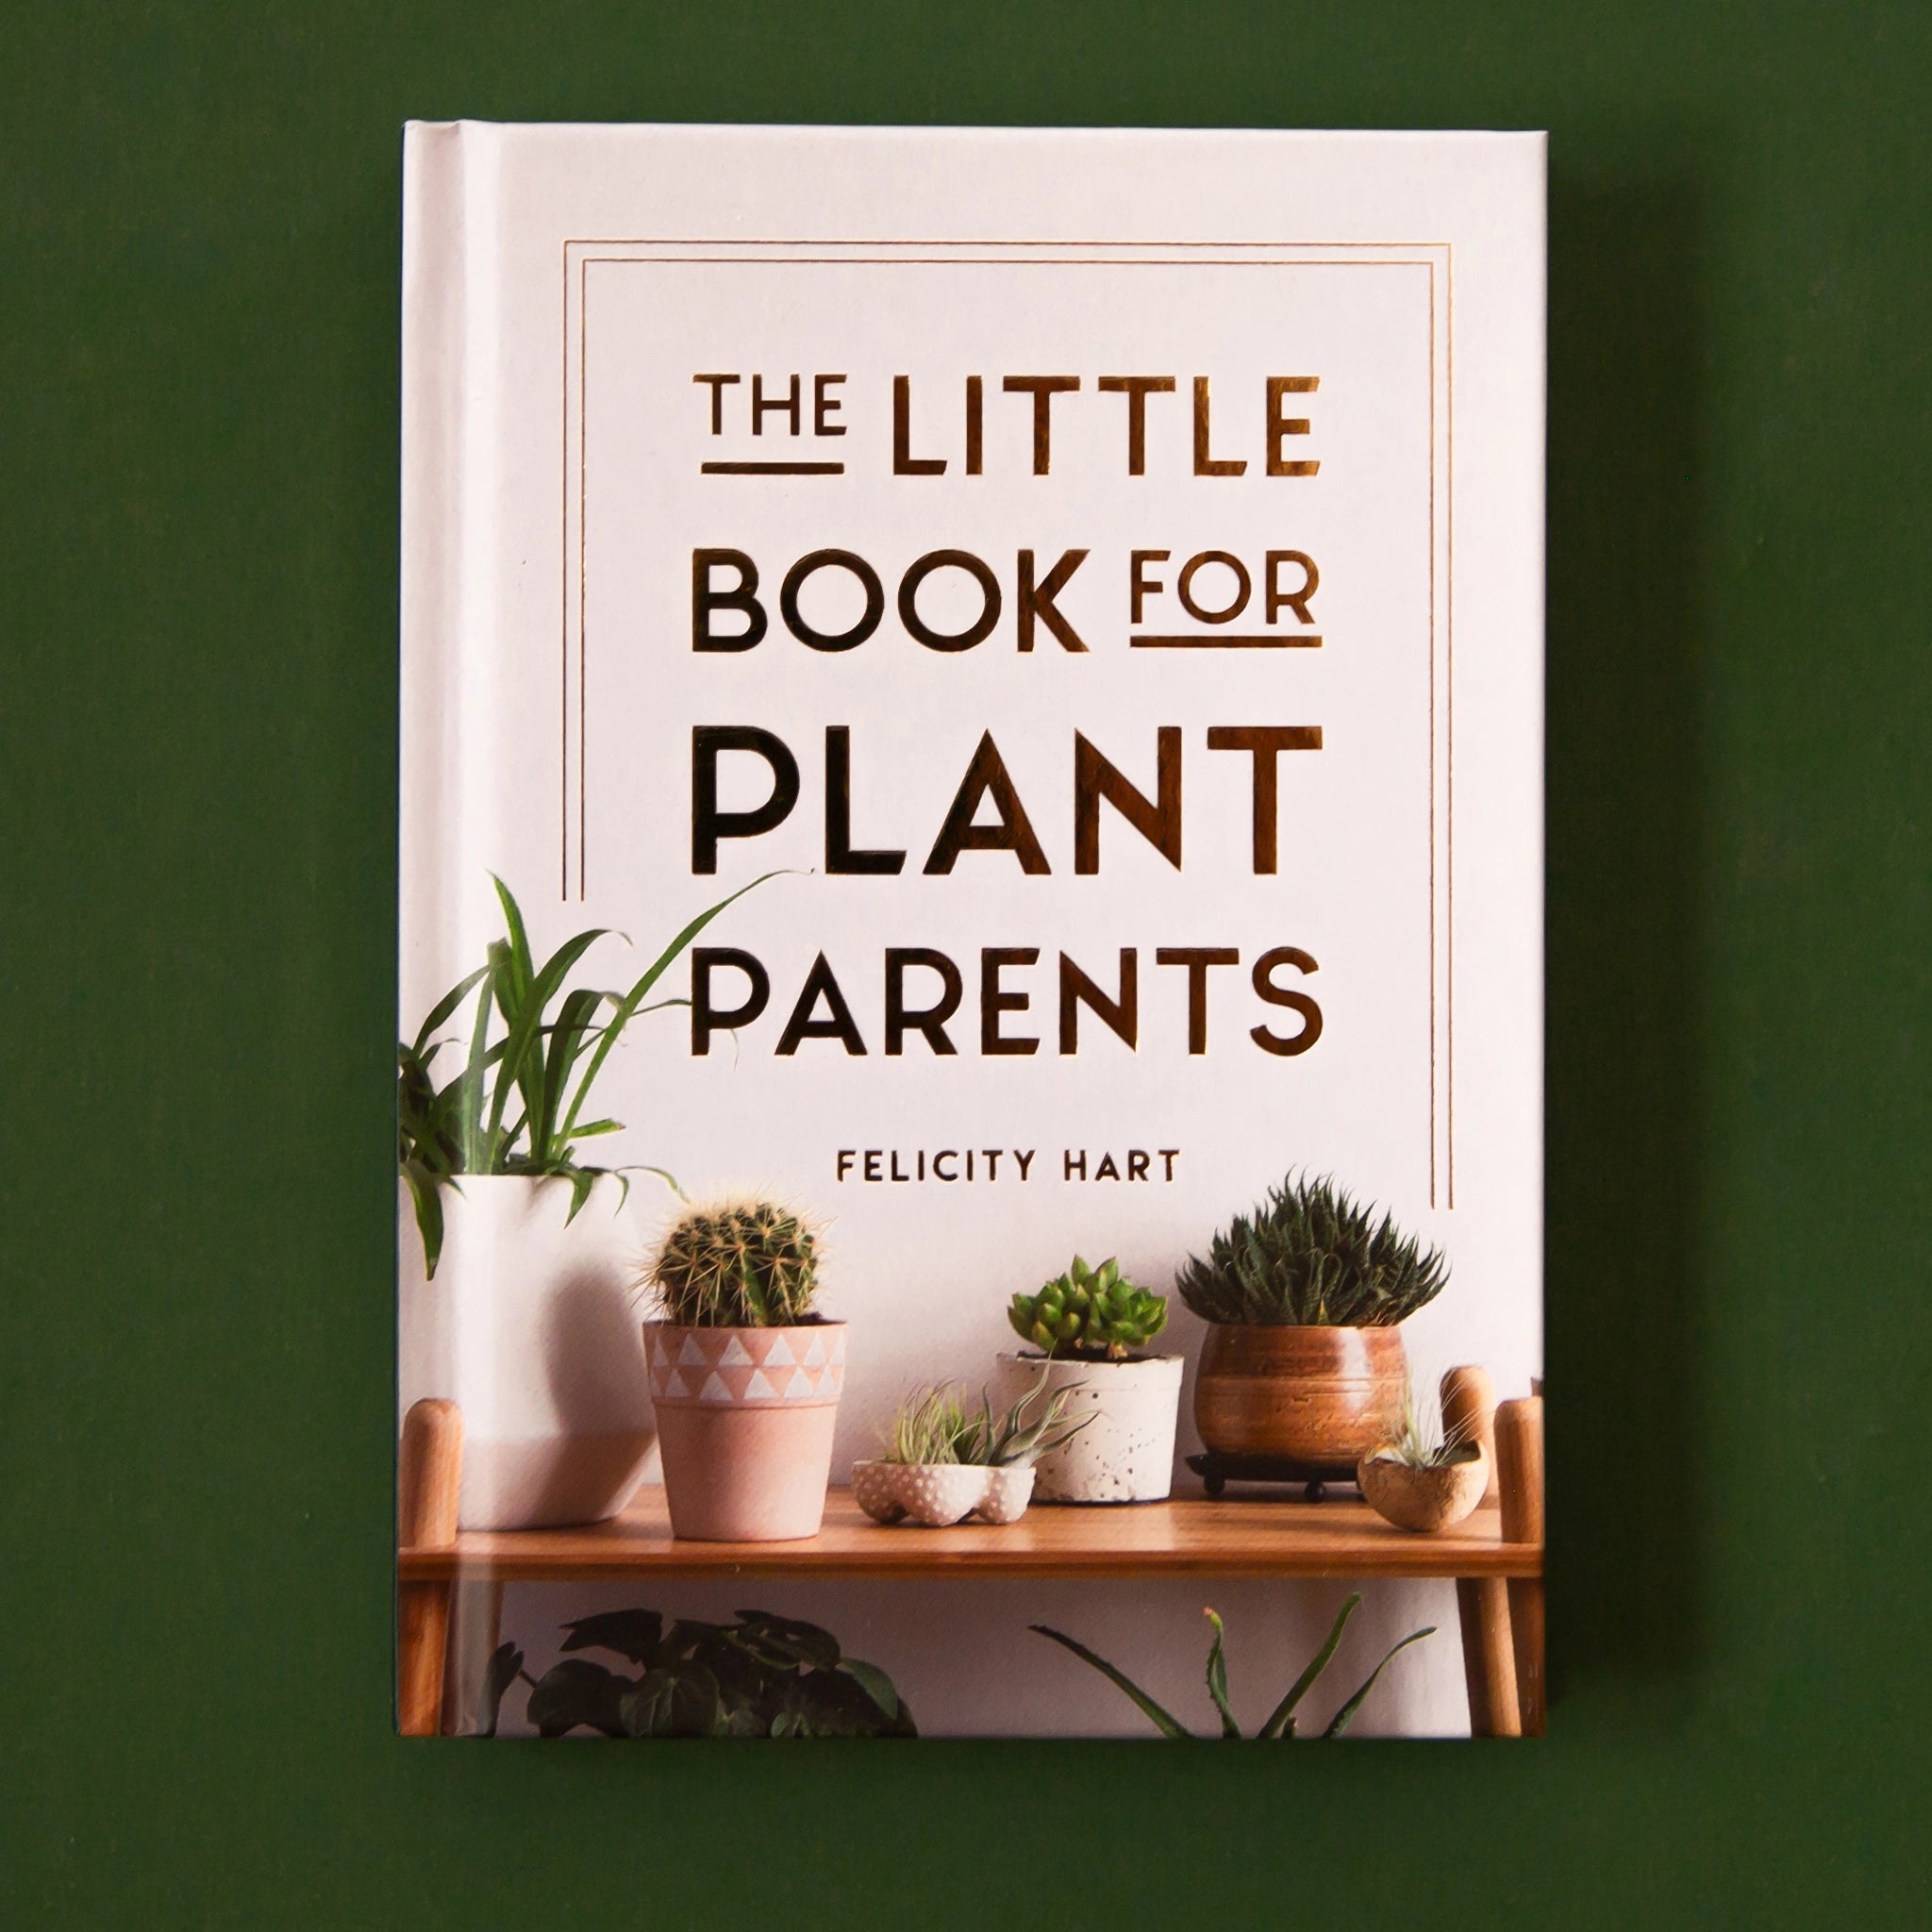 On a cream background is a light tan/pink book cover with rose gold text that reads, "The Little Book For Plant Parents by Felicity Hart" as well as a photograph of different house plants and cacti sitting on a shelf.